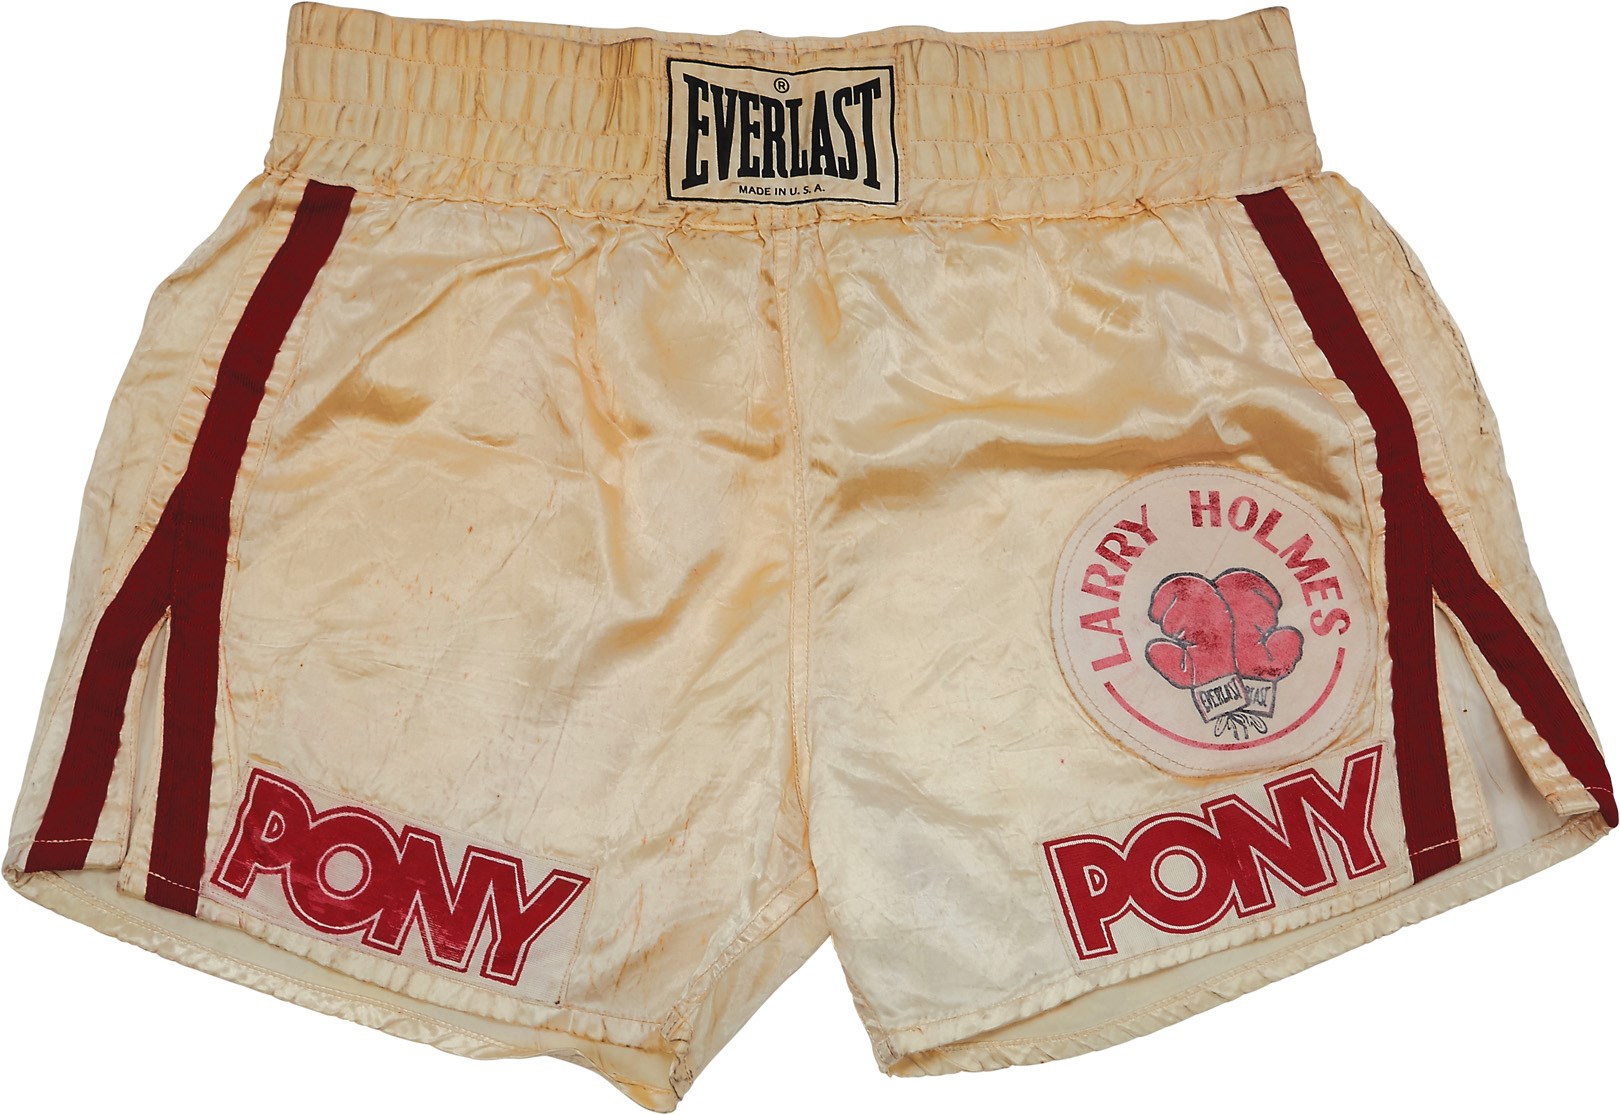 Muhammad Ali & Boxing - 1985 Larry Holmes Fight Worn Trunks vs. Tim Witherspoon (Photo-Matched)